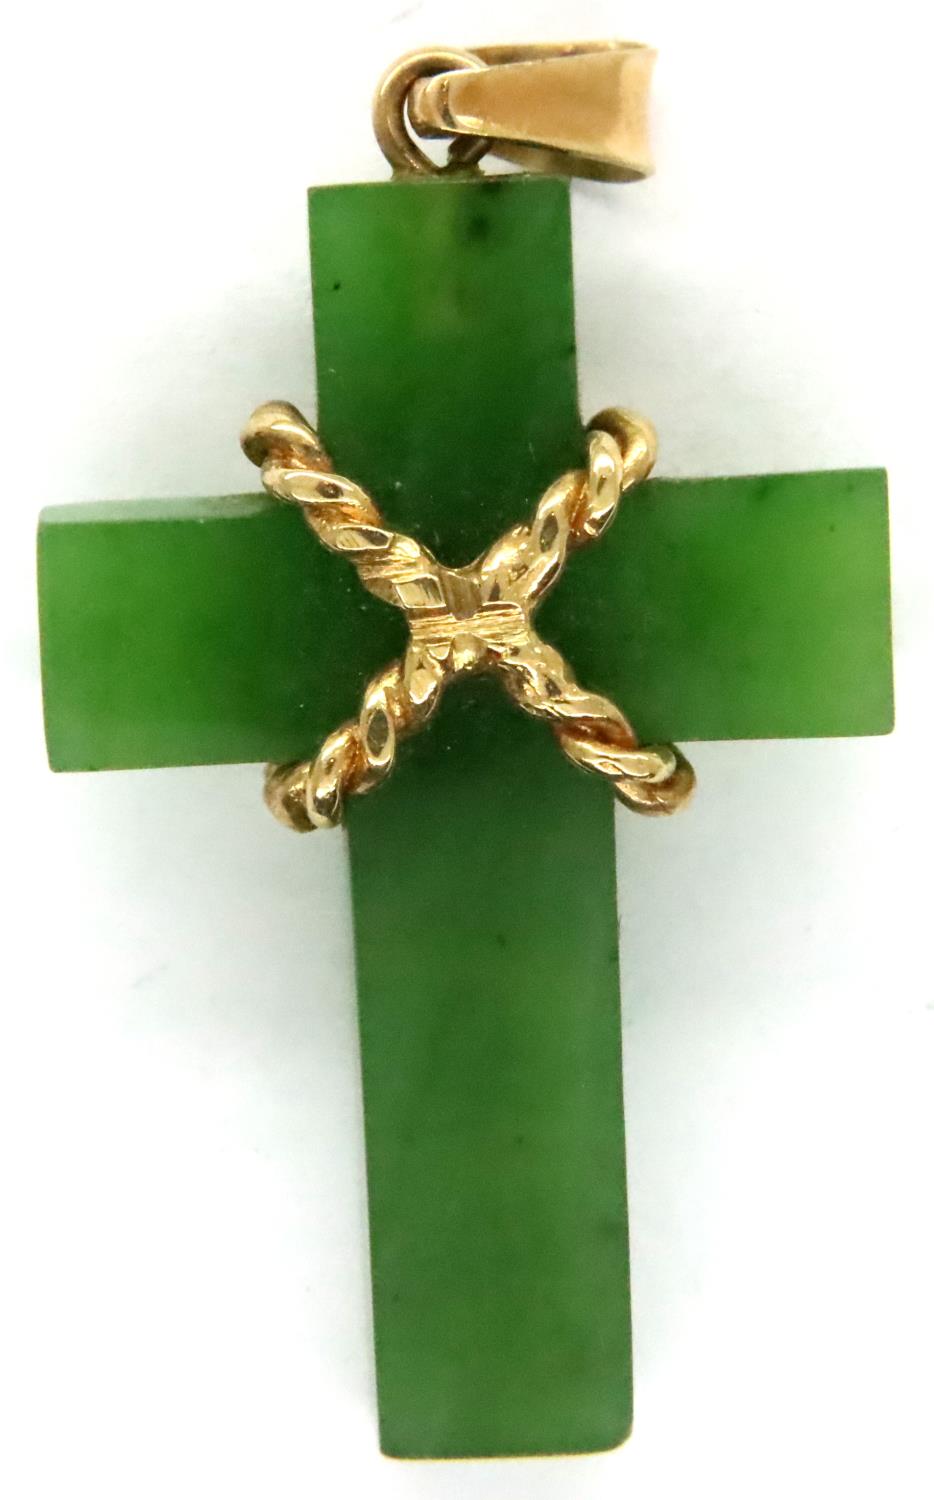 9ct gold mounted jadeite cross pendant, H: 35 mm. P&P Group 1 (£14+VAT for the first lot and £1+